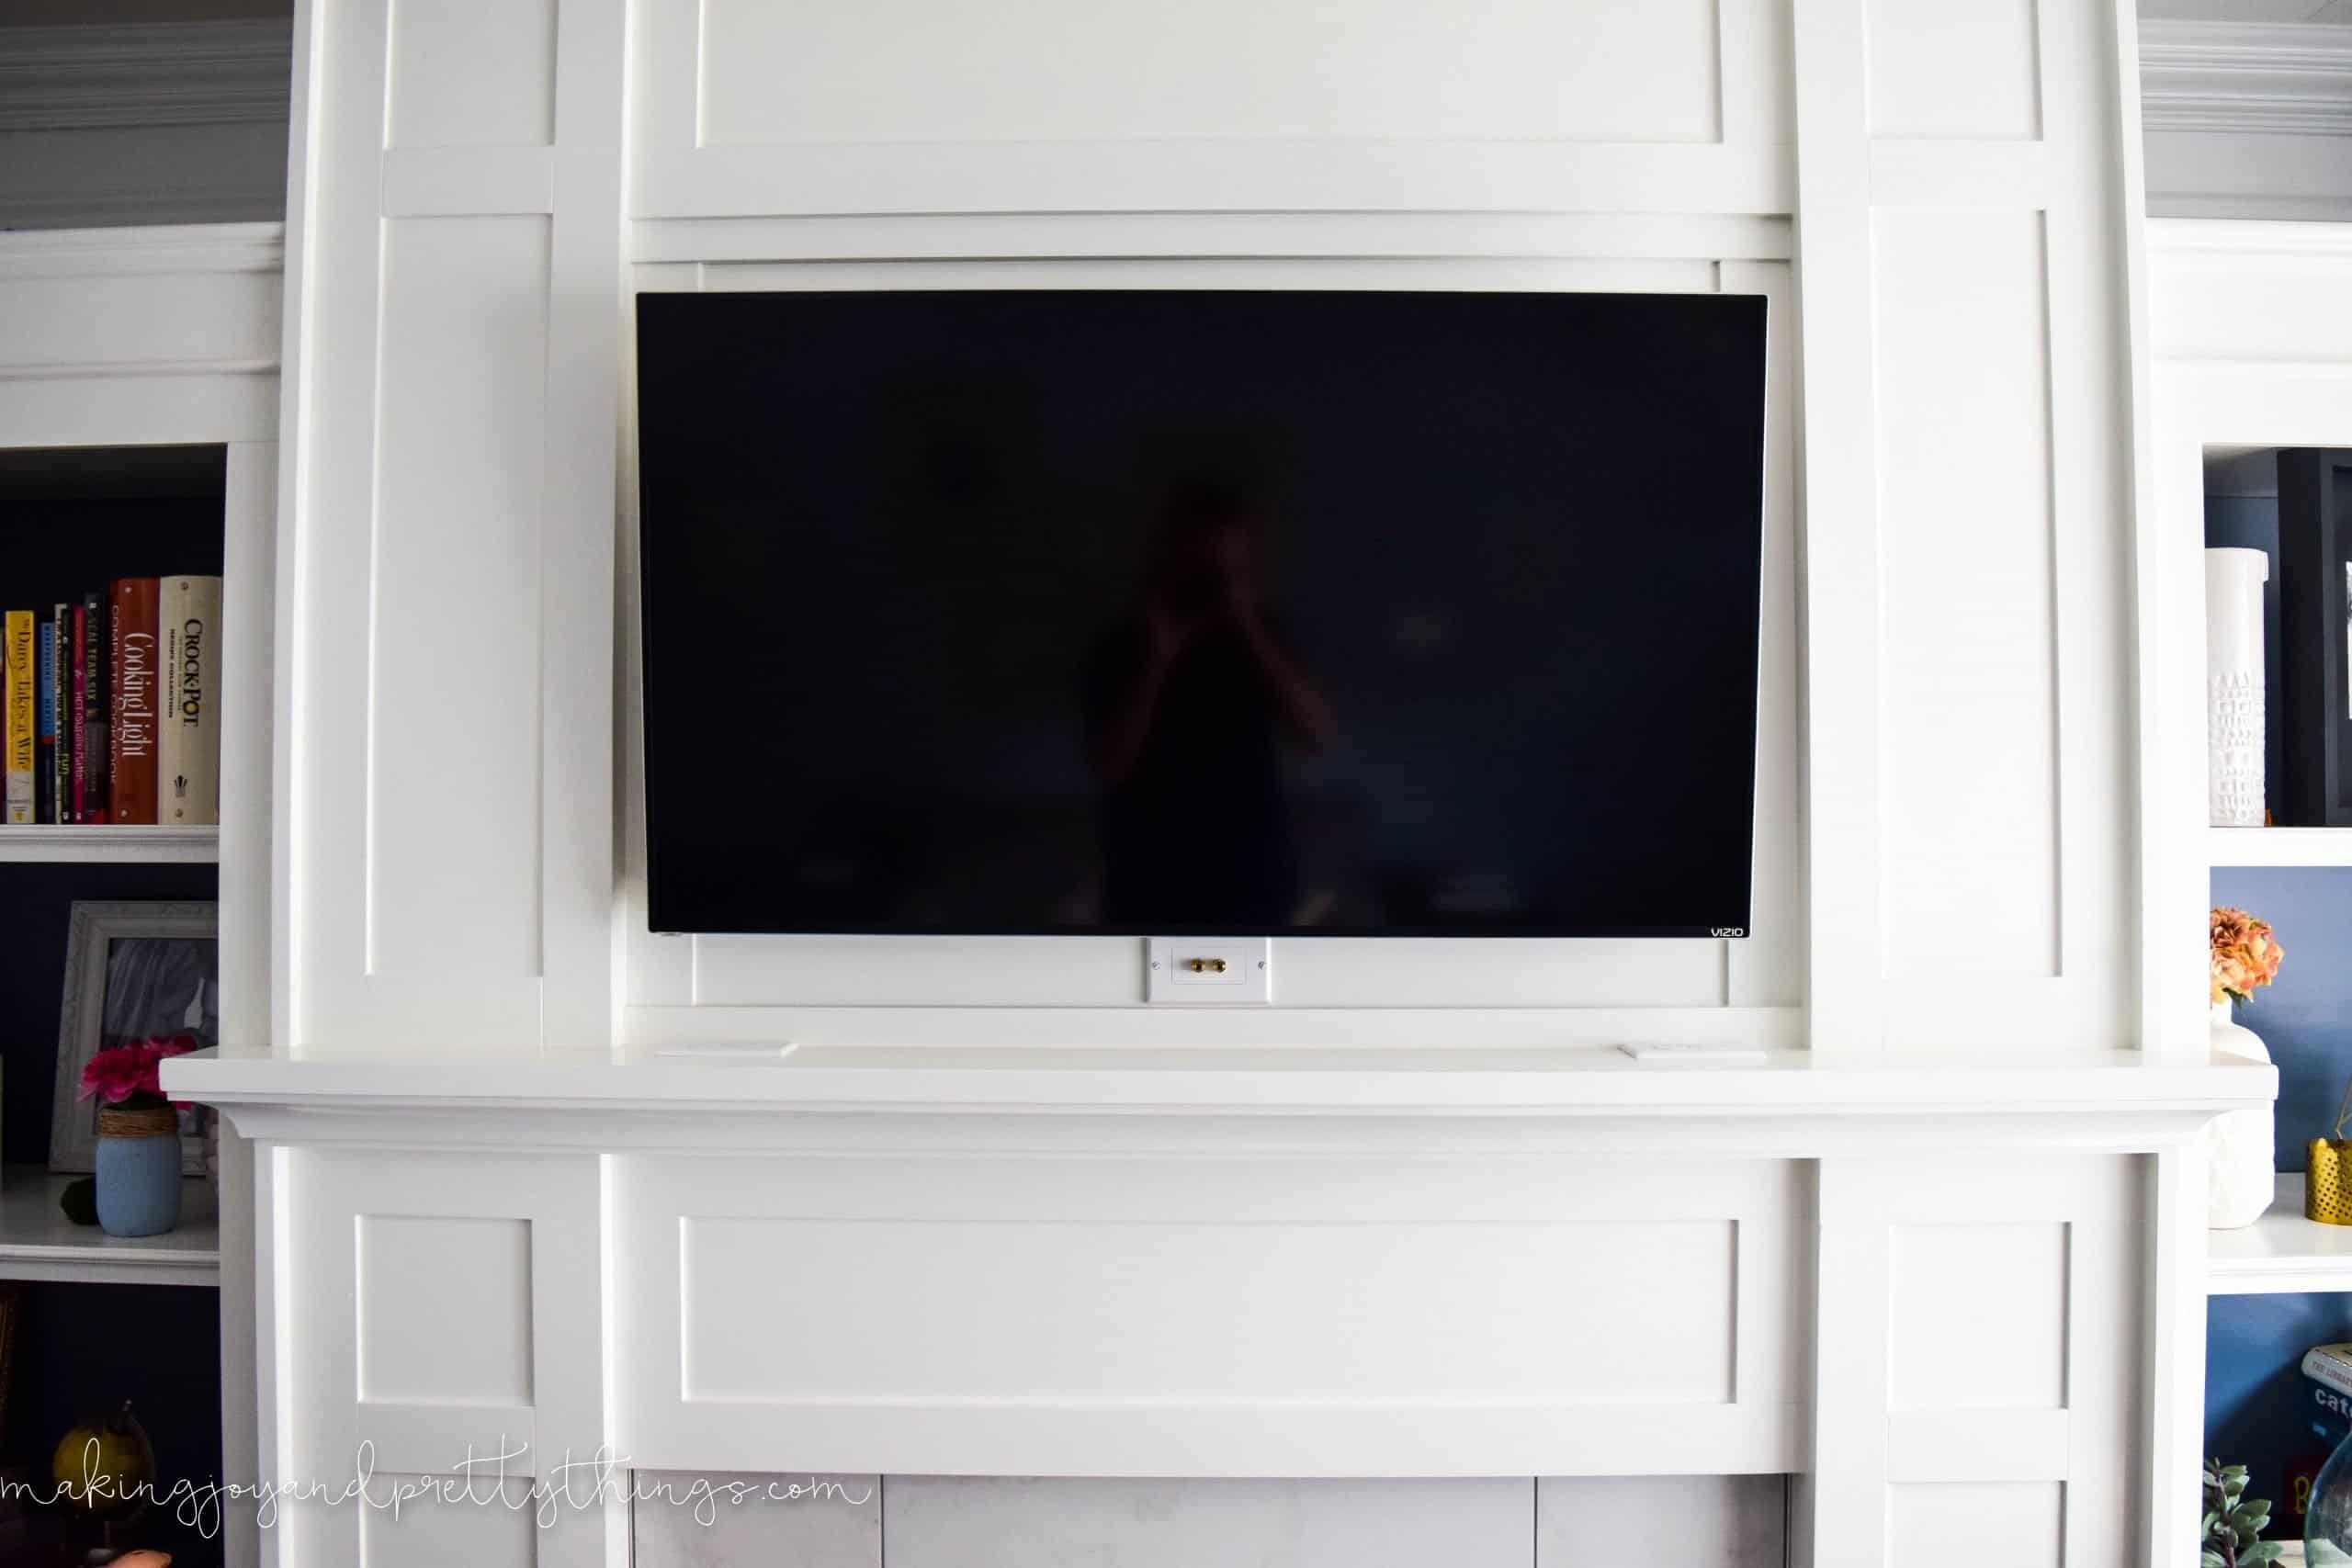 A plain white mantle with a large flat screen TV hanging in the center.